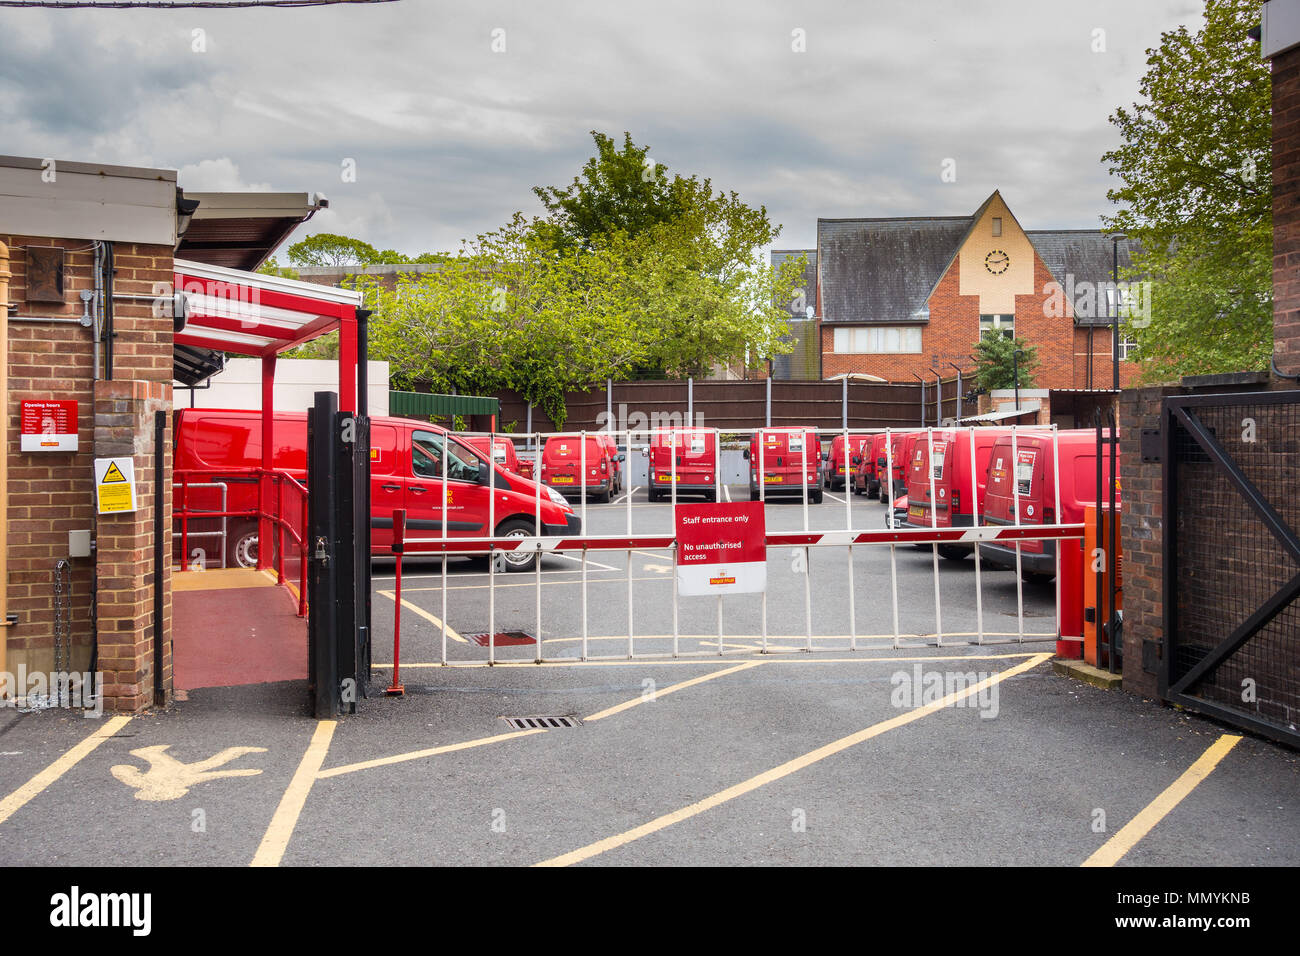 A barrier at the entrance to the car park at The Queen Elizabeth Royal Mail Delivery Office in Windsor Stock Photo